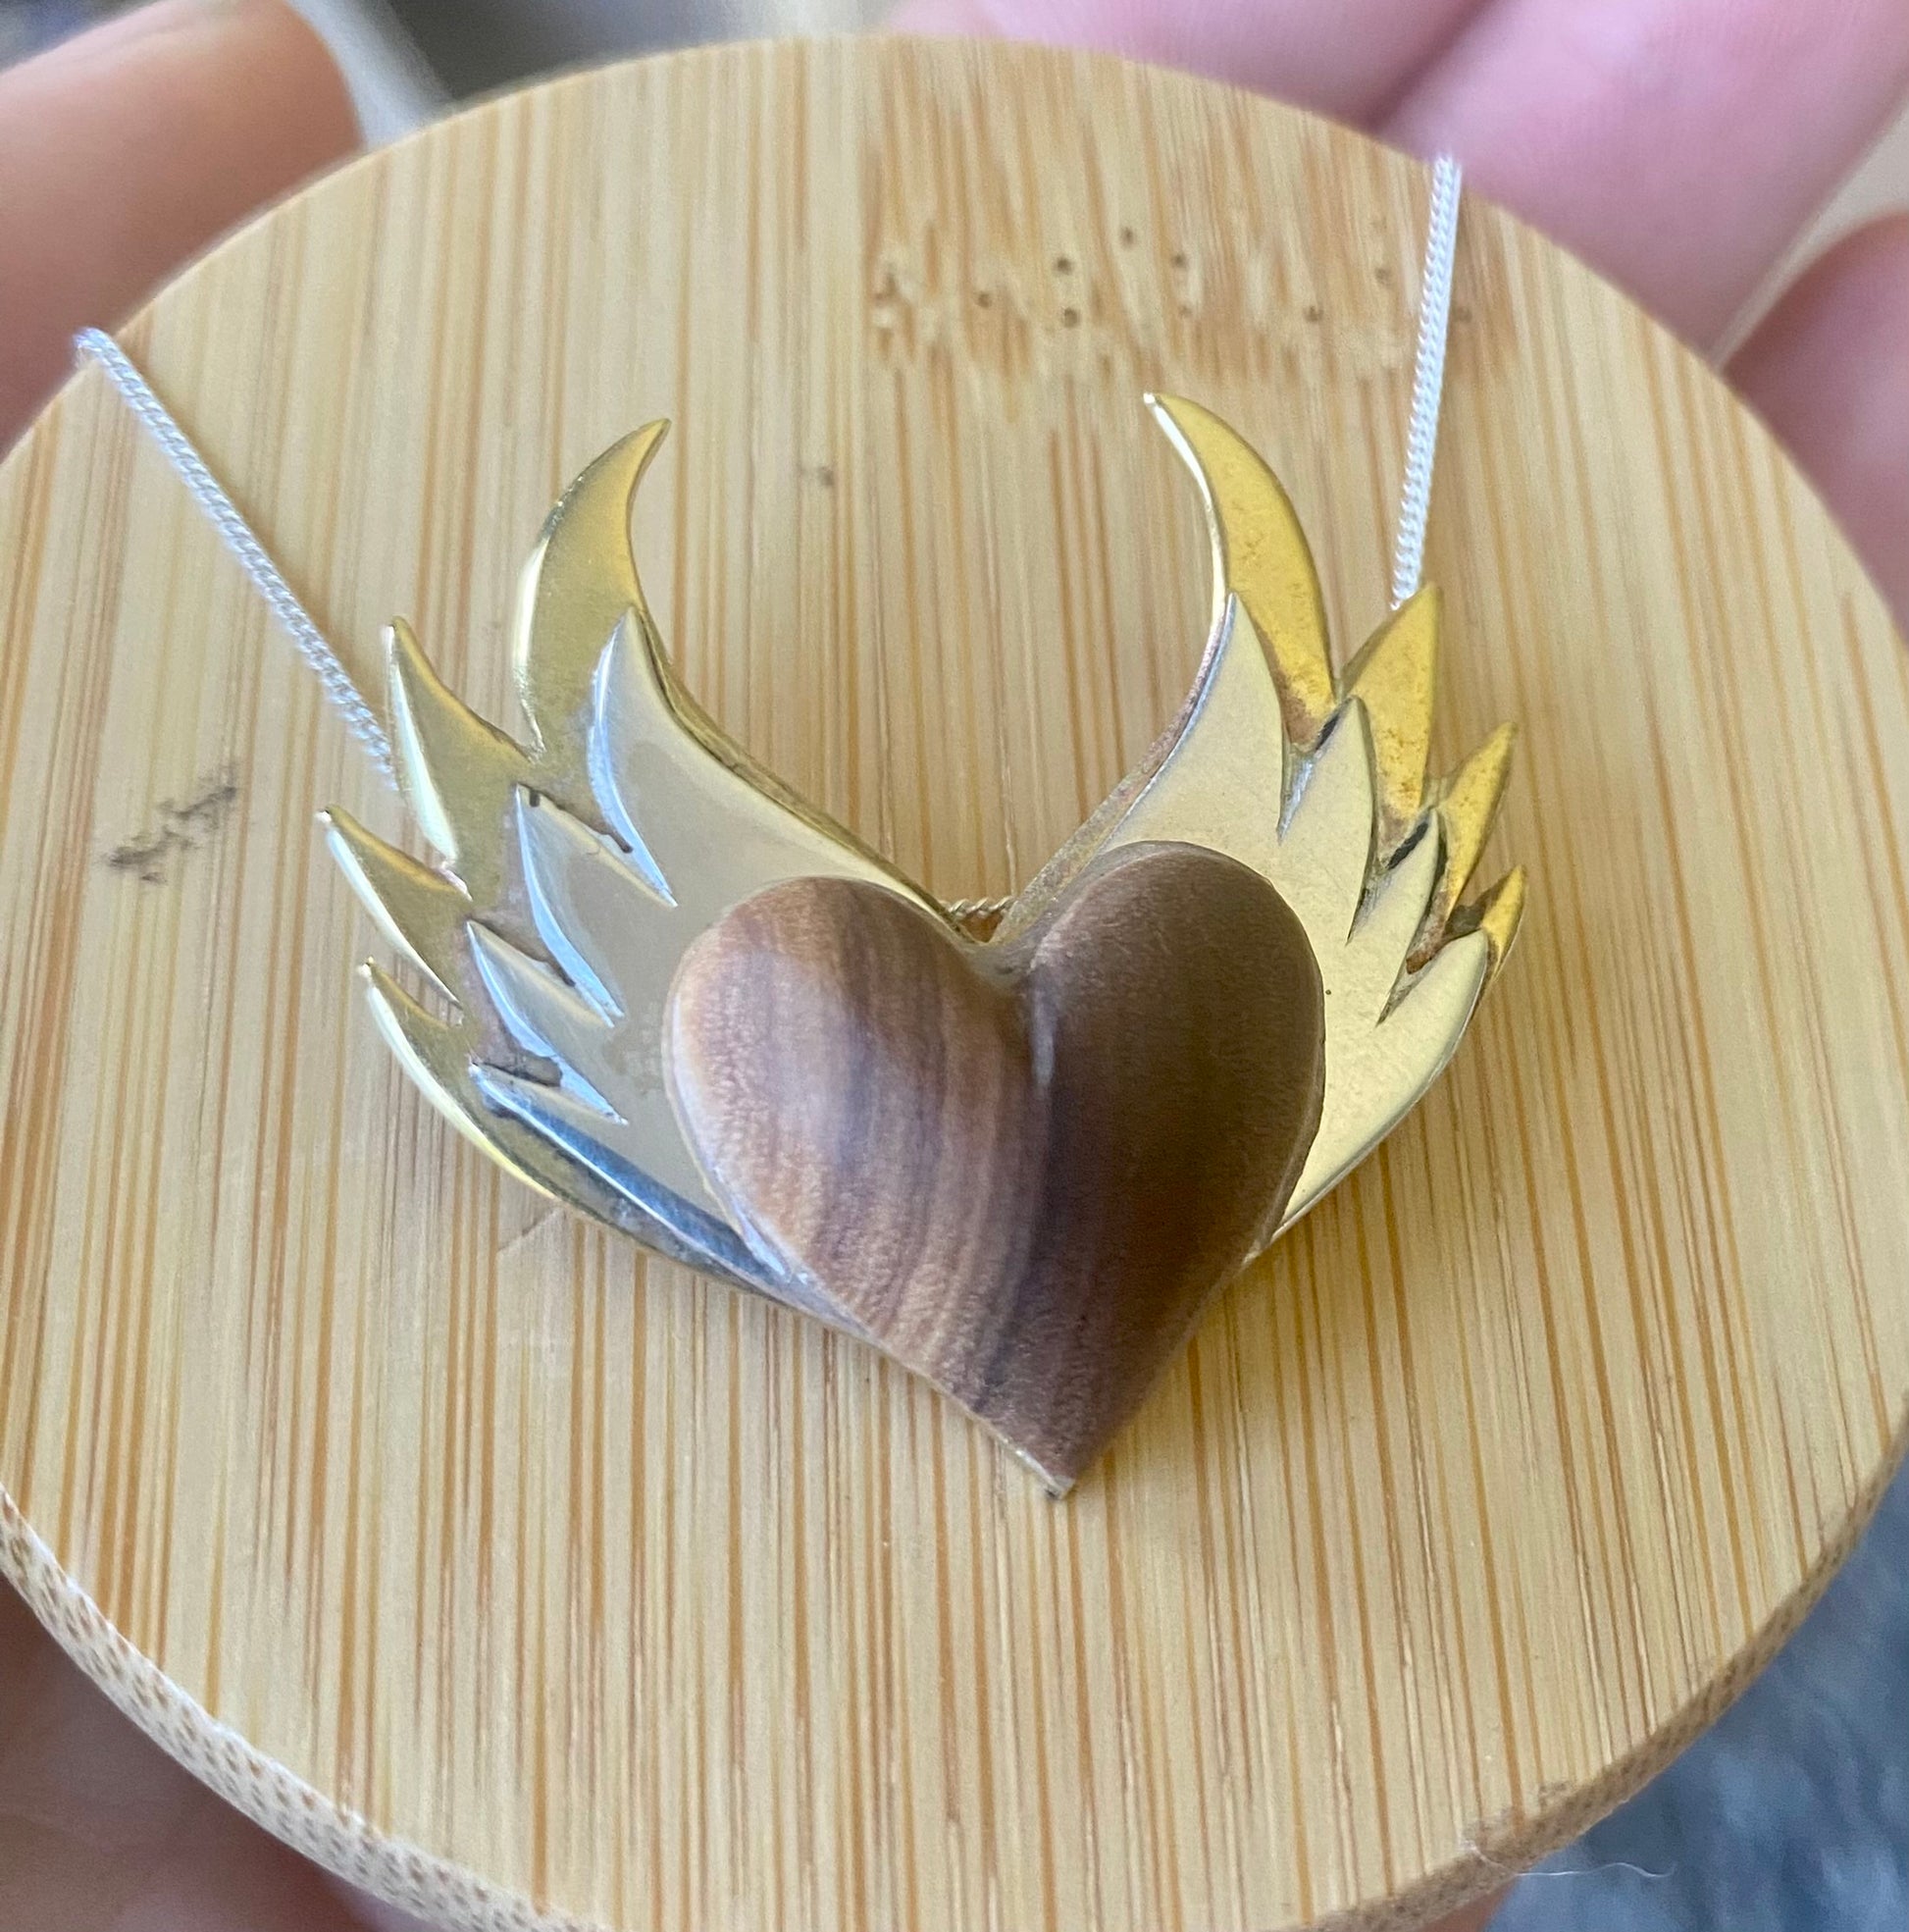 Side view of the silver-winged wooden heart pendant showing the depth and craftsmanship